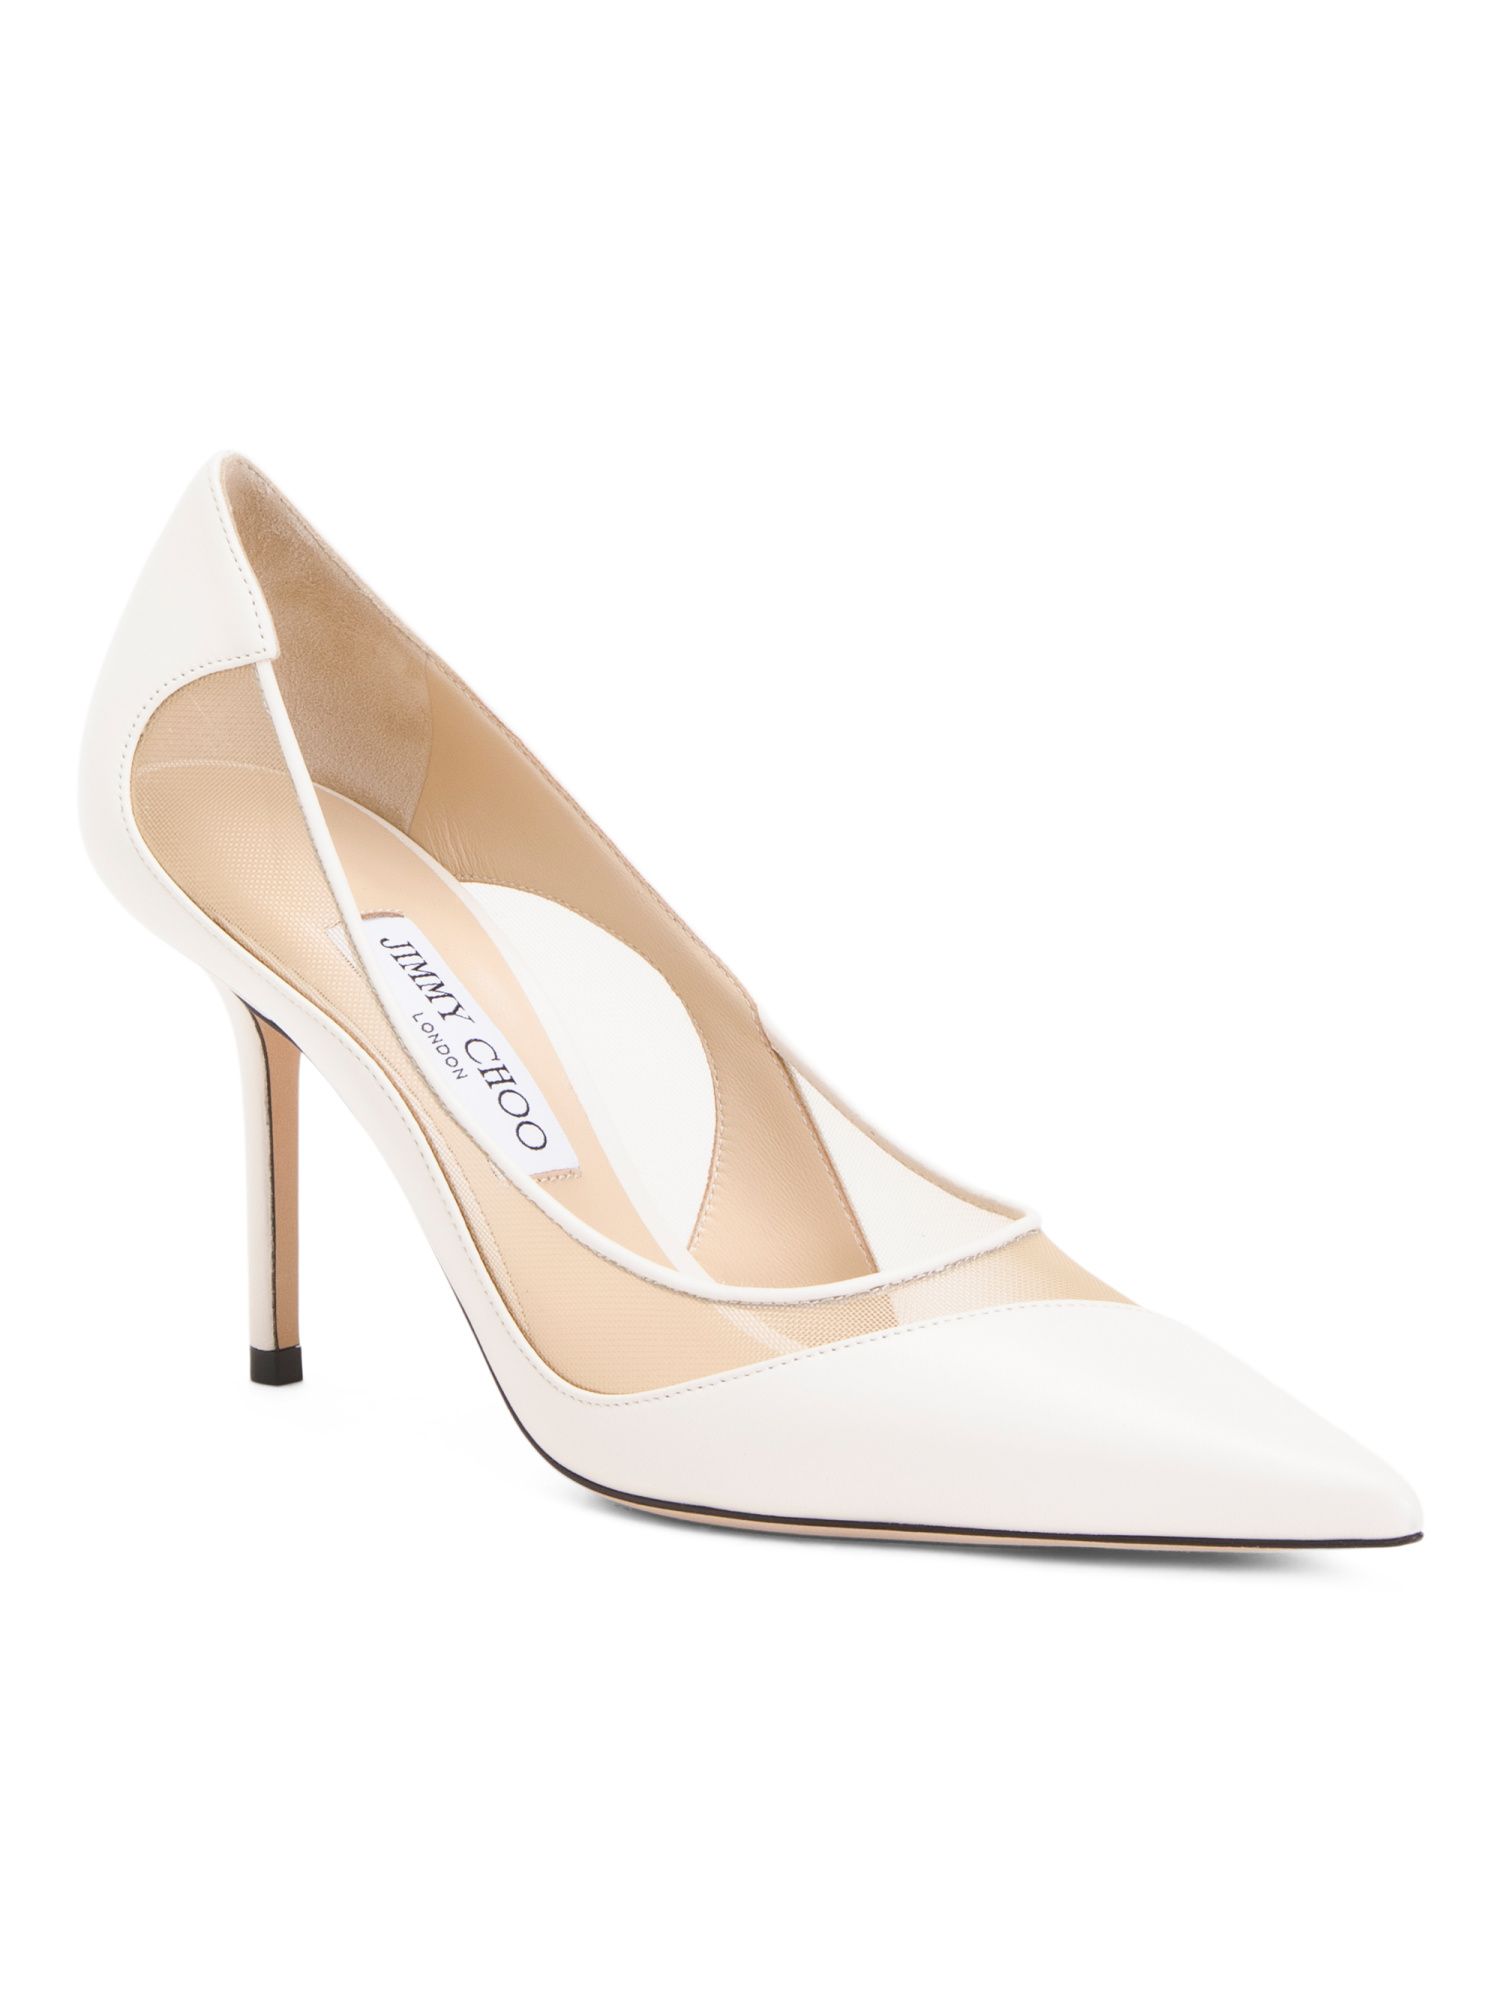 Made In Italy Sheer Insets Pumps | TJ Maxx